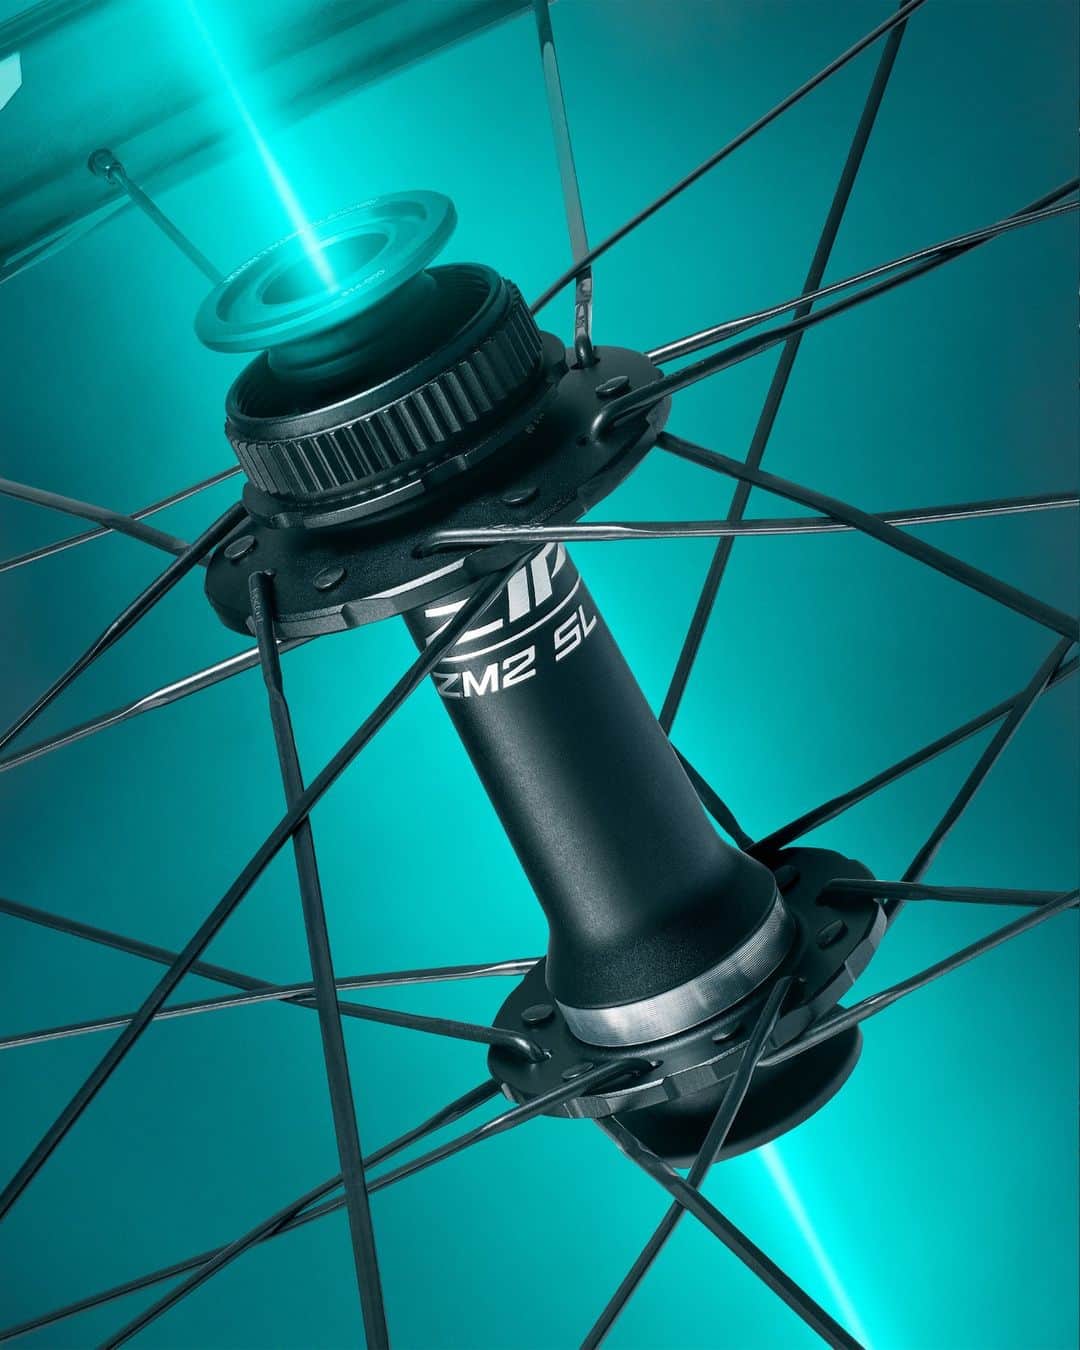 Zipp Speed Weaponryのインスタグラム：「Among the lightest on the market, the ZM2 SL hubset in the 1ZERO HITOP SW ensures you’ll be quick to accelerate and back on the pedals sooner after corners with the 66 points of engagement.  Learn more about how the 1ZERO HITOP SW is making XC faster at the LINK IN BIO.」